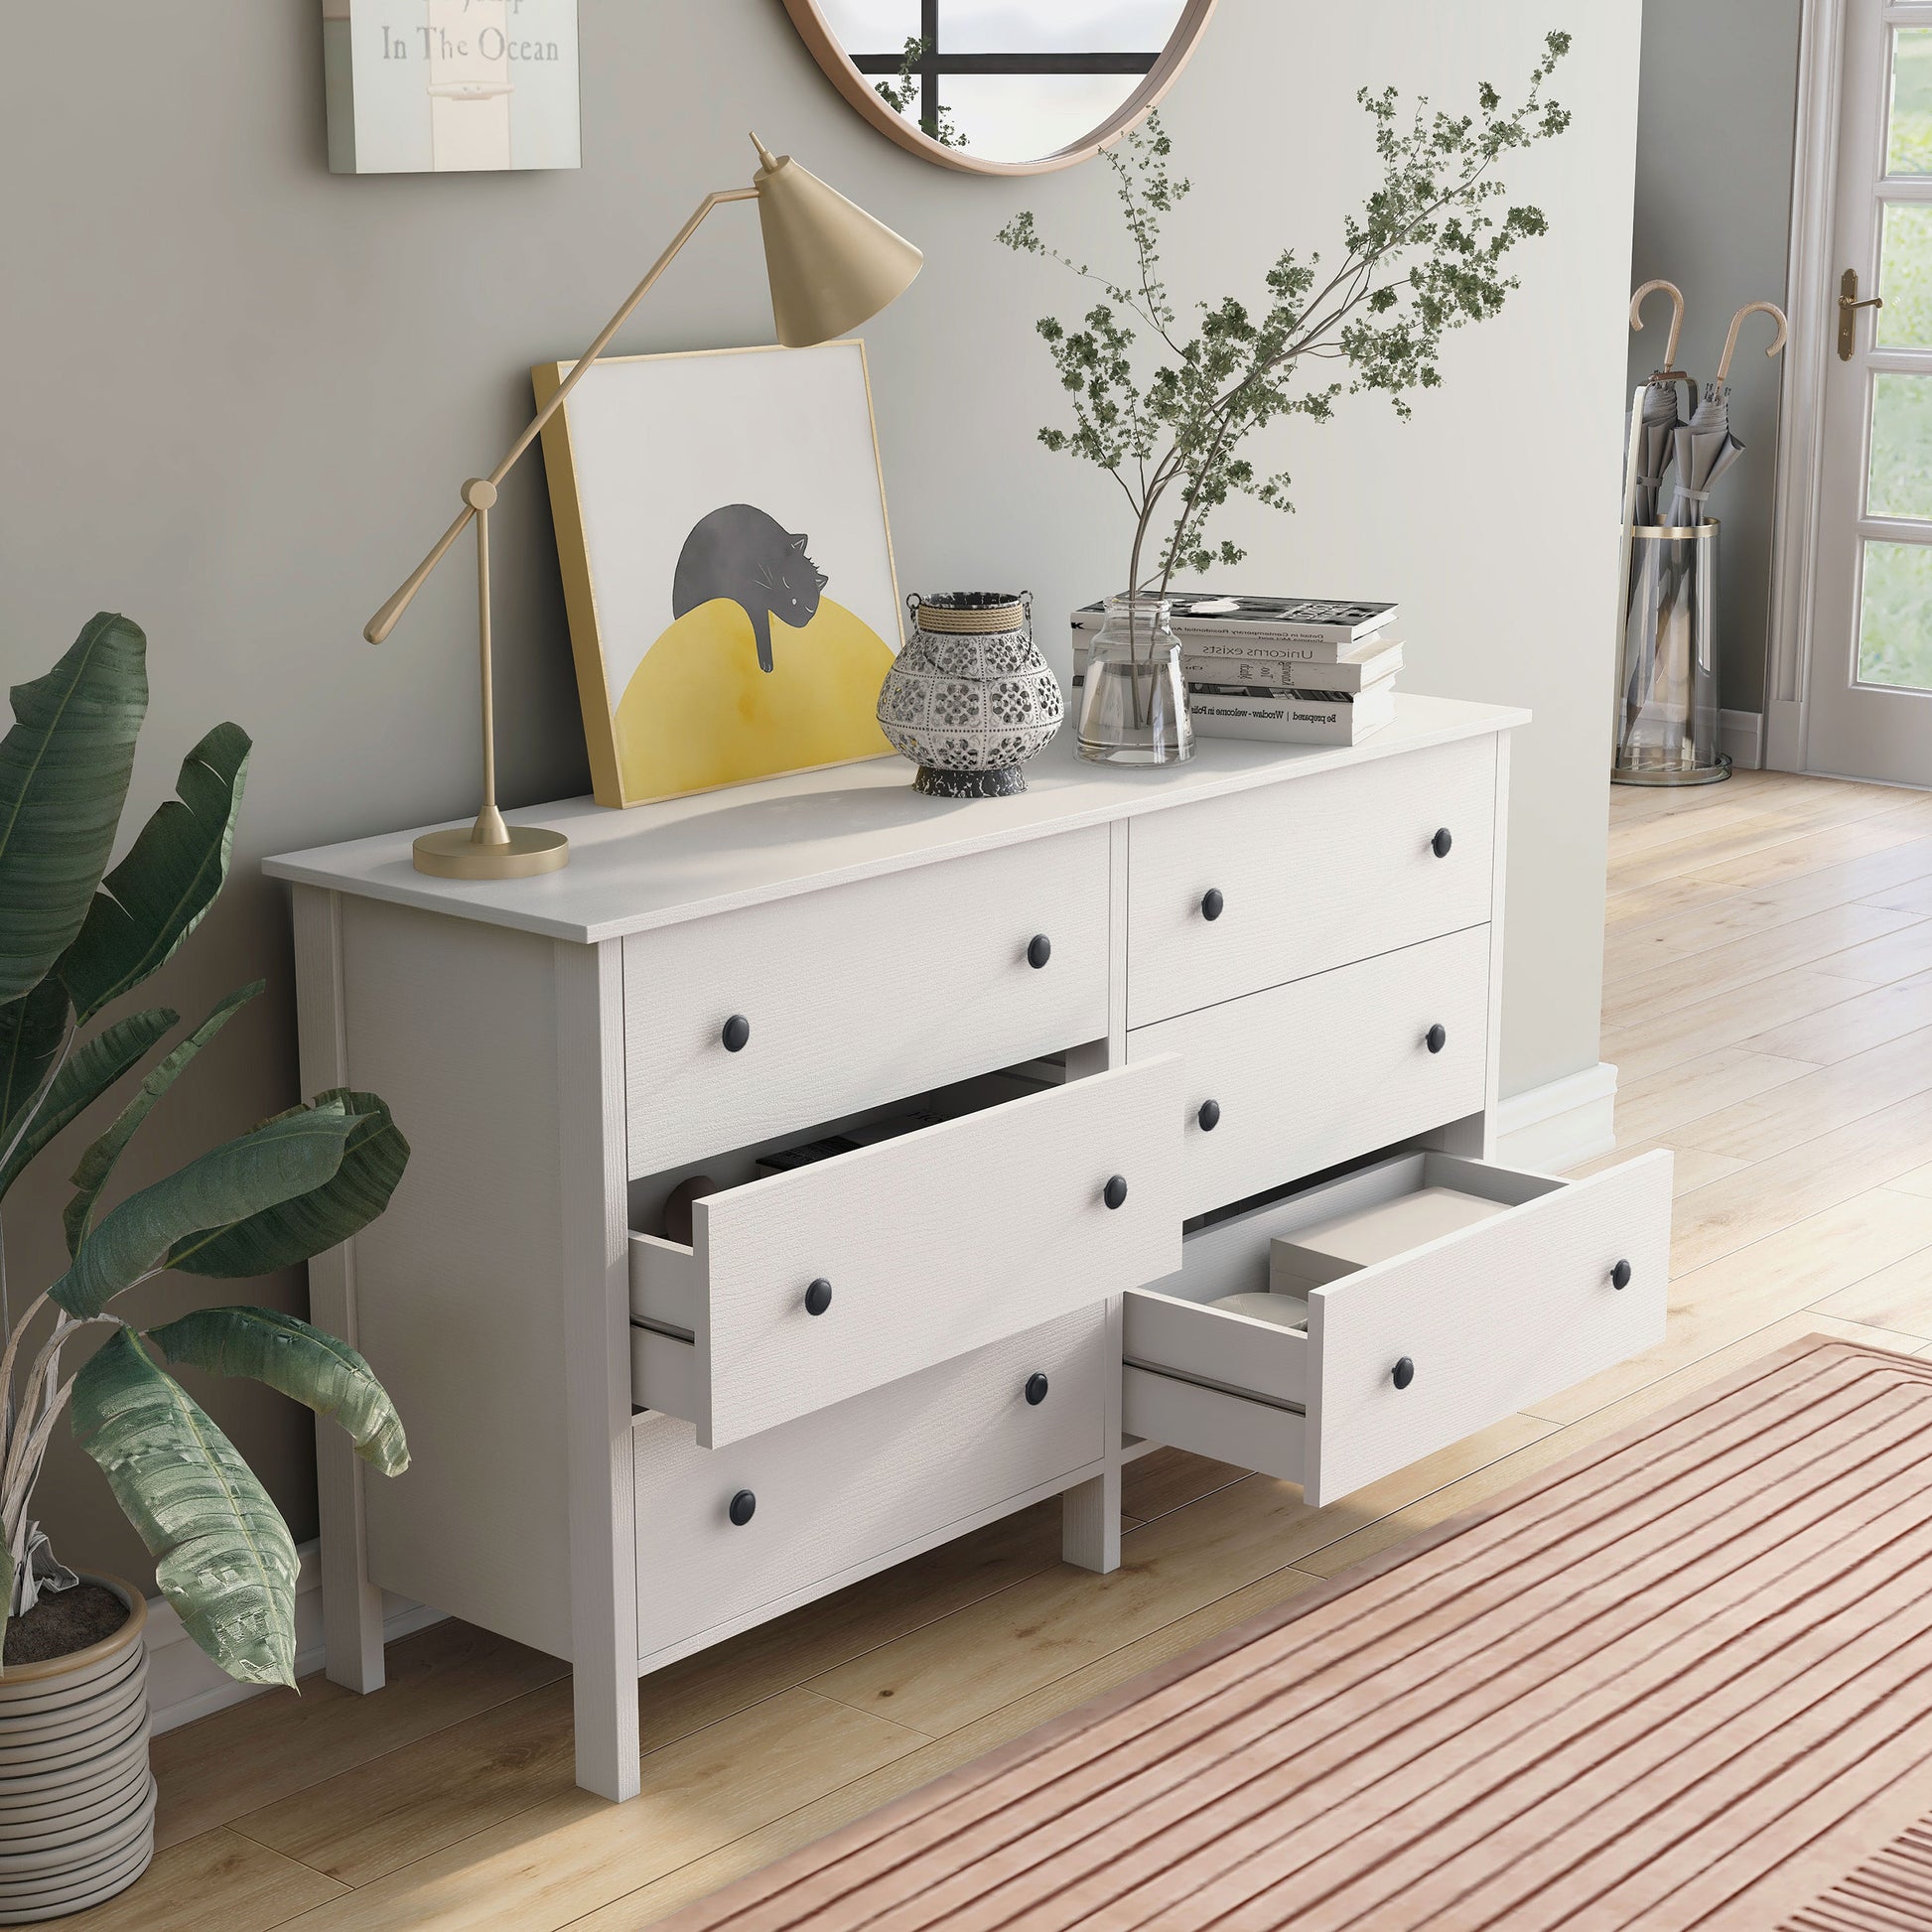 Right angled transitional white six-drawer youth dresser with two drawers open in a bedroom with accessories